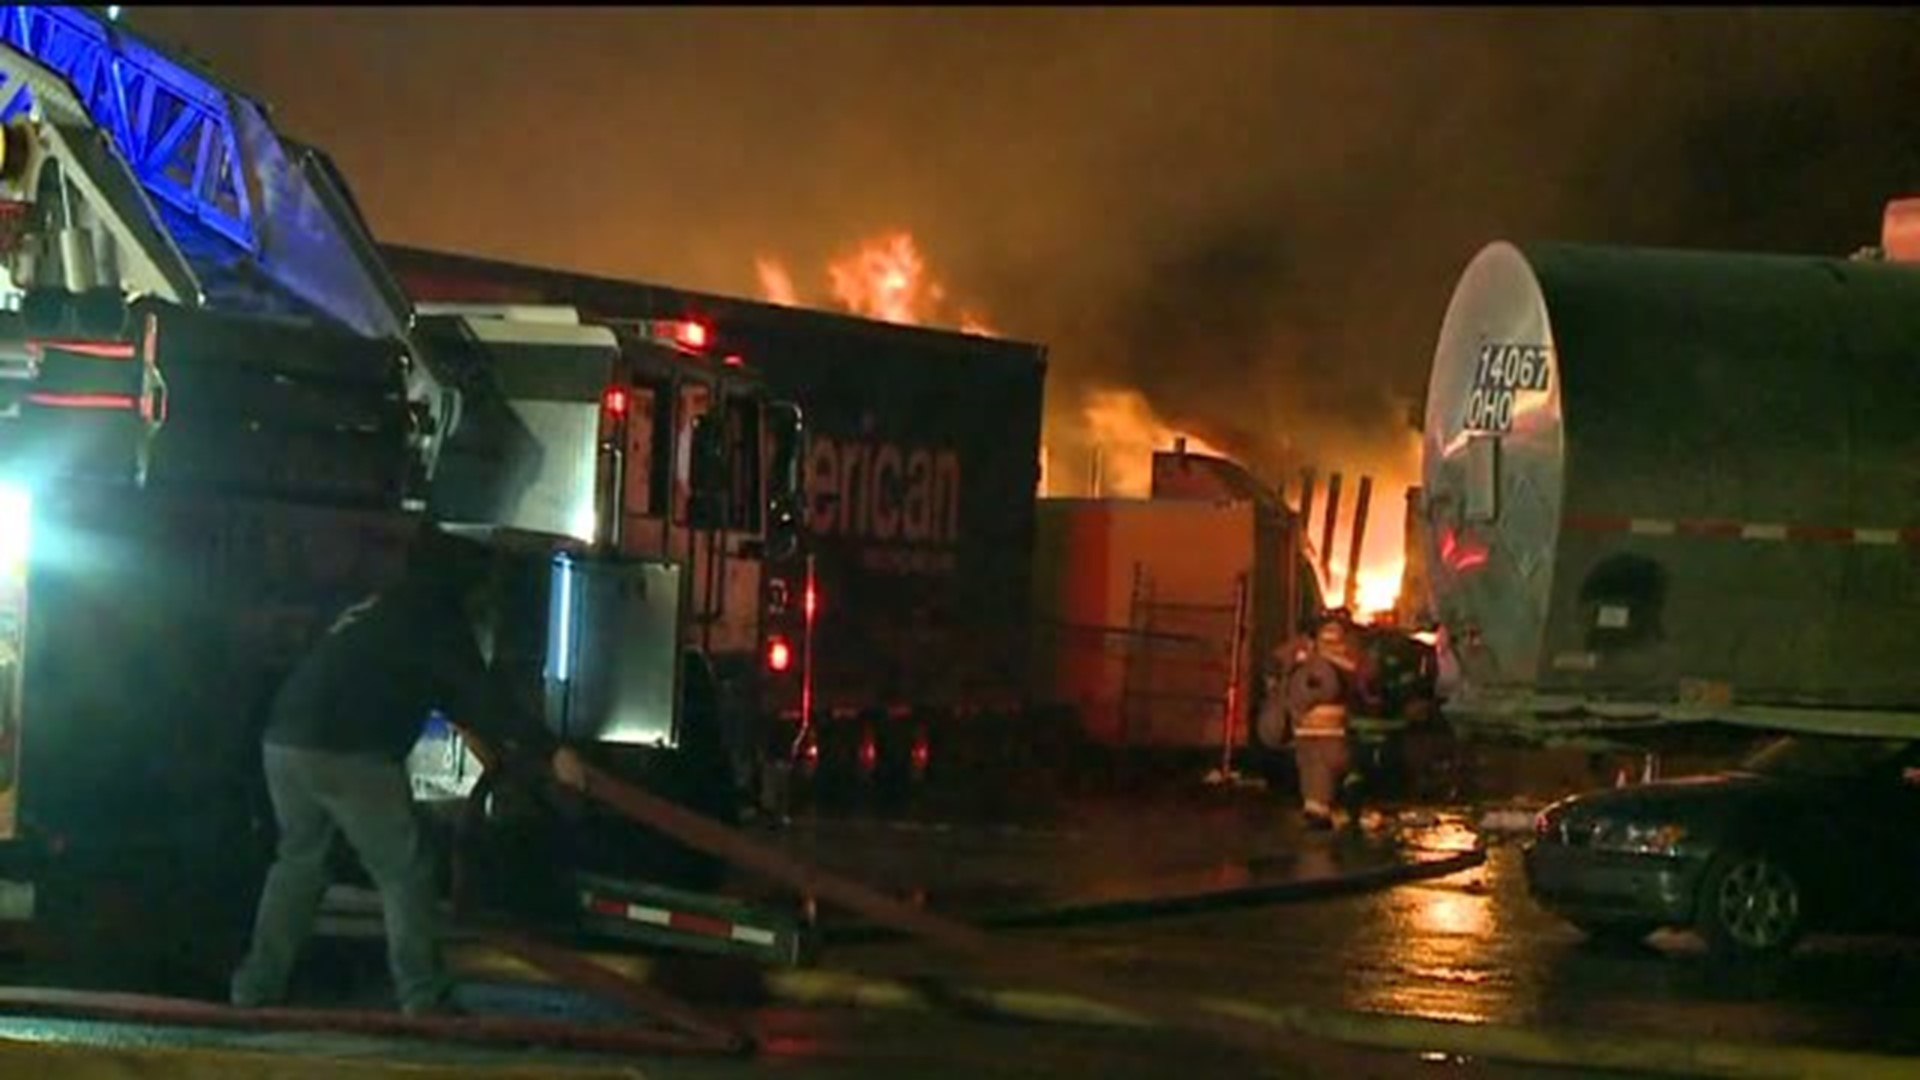 Owners Vow to Come Back After Fire at Garage